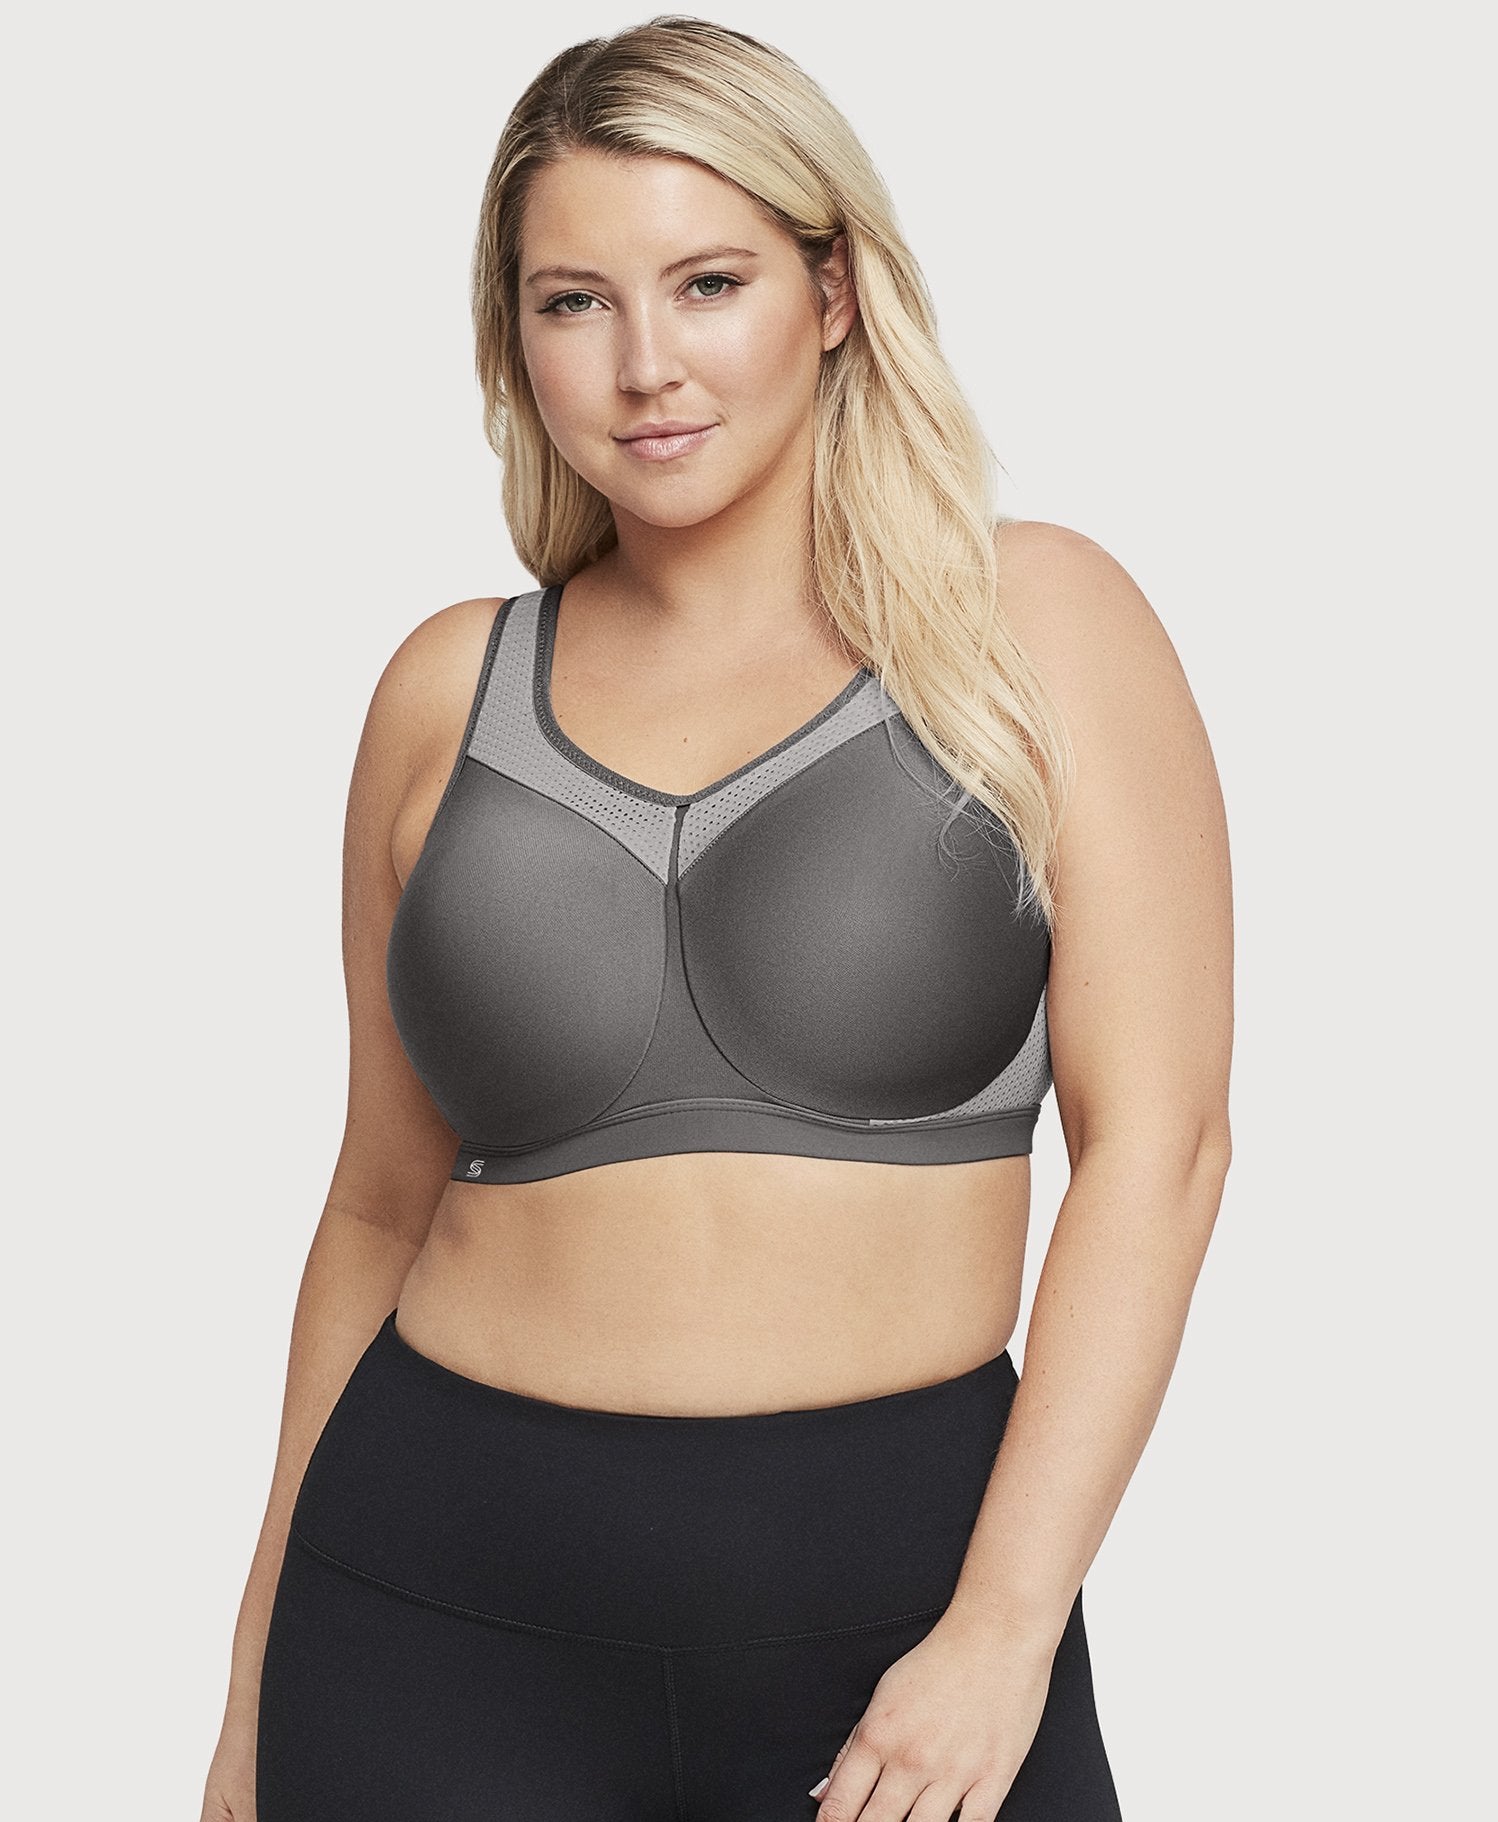 Sports Bra Hacks For The Beautiful Curvy Women - Gym Clothes Manufacturer